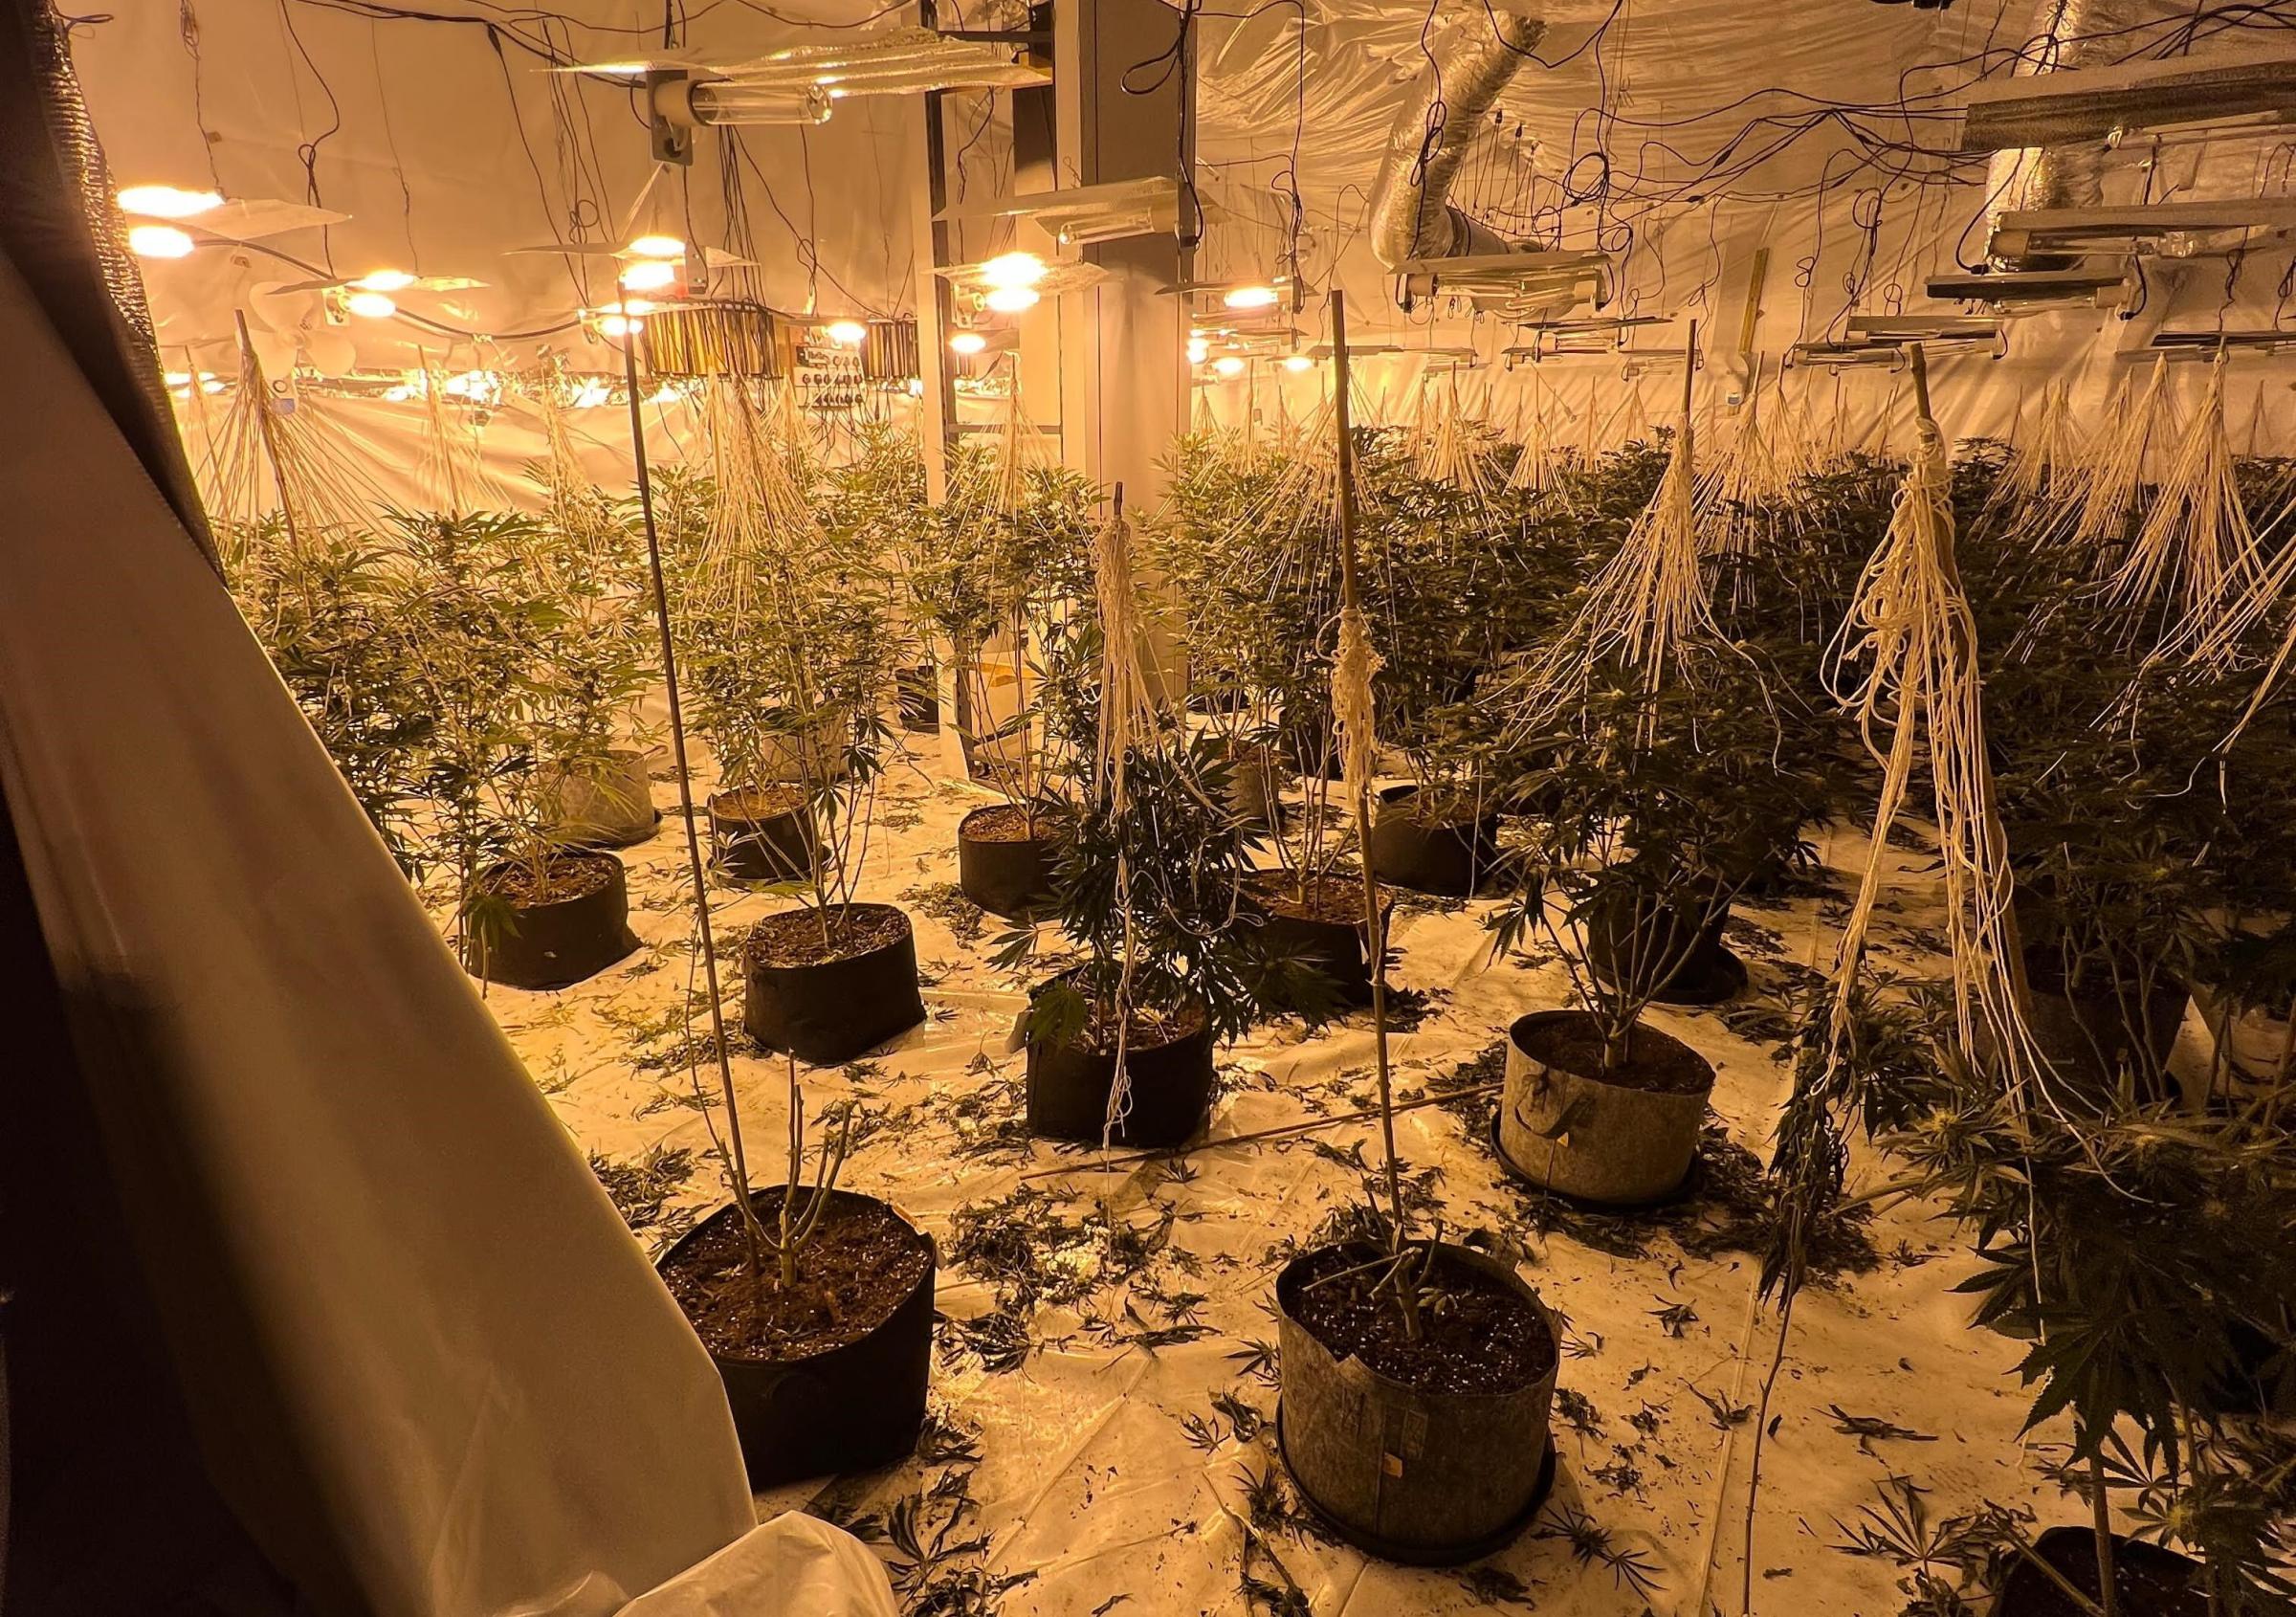 Inside the huge cannabis farm that was discovered by police